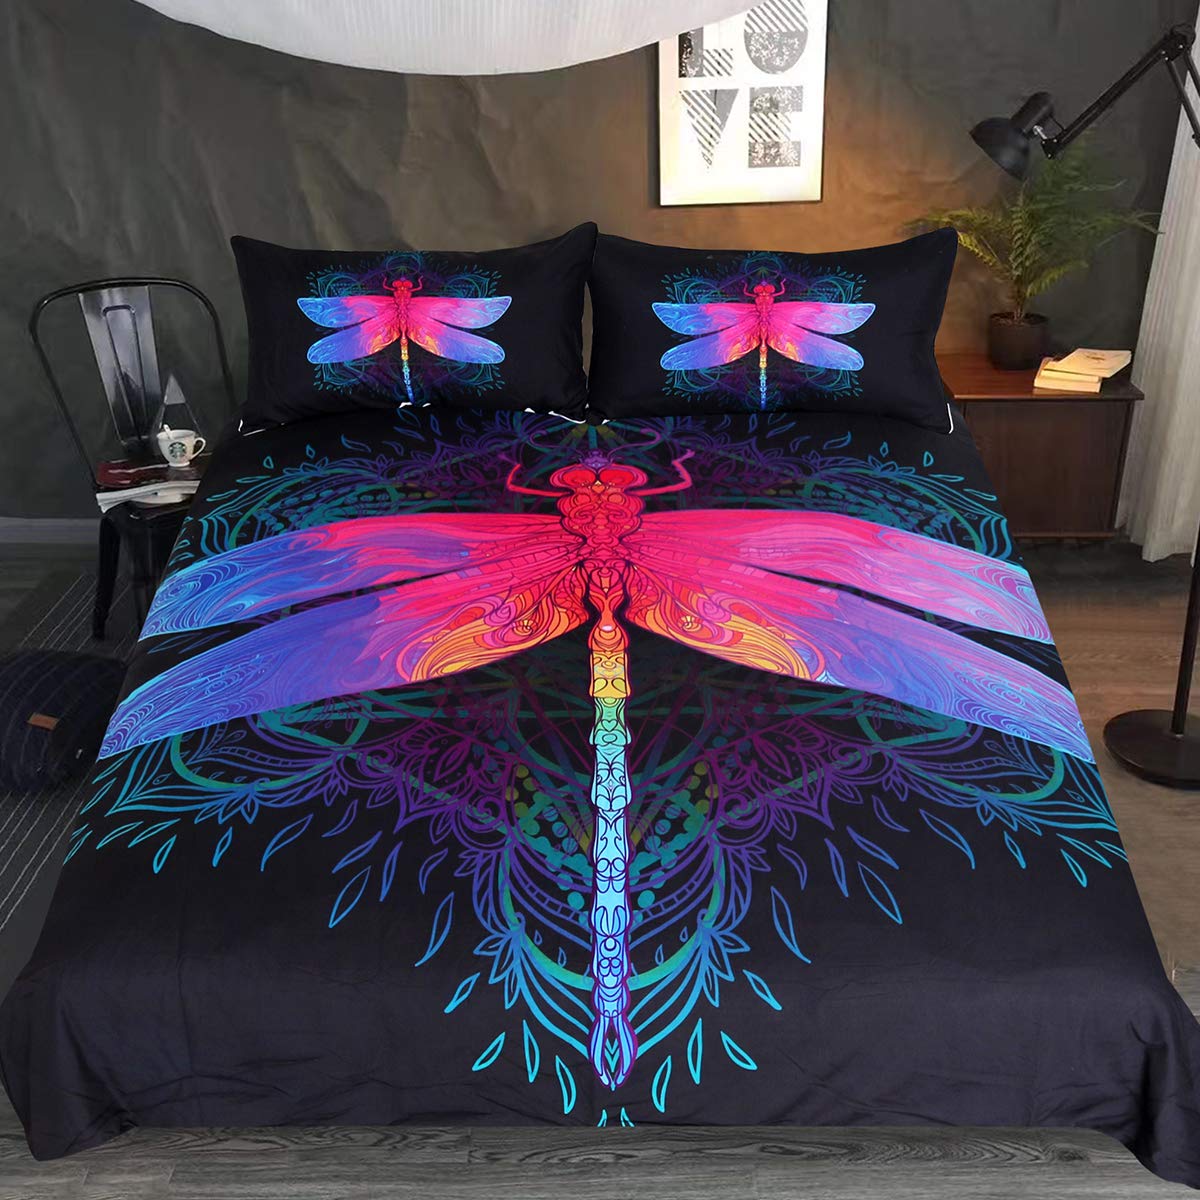 Sleepwish Dragonfly Art Bedding Set Duvet Cover And 2 Pillowcases